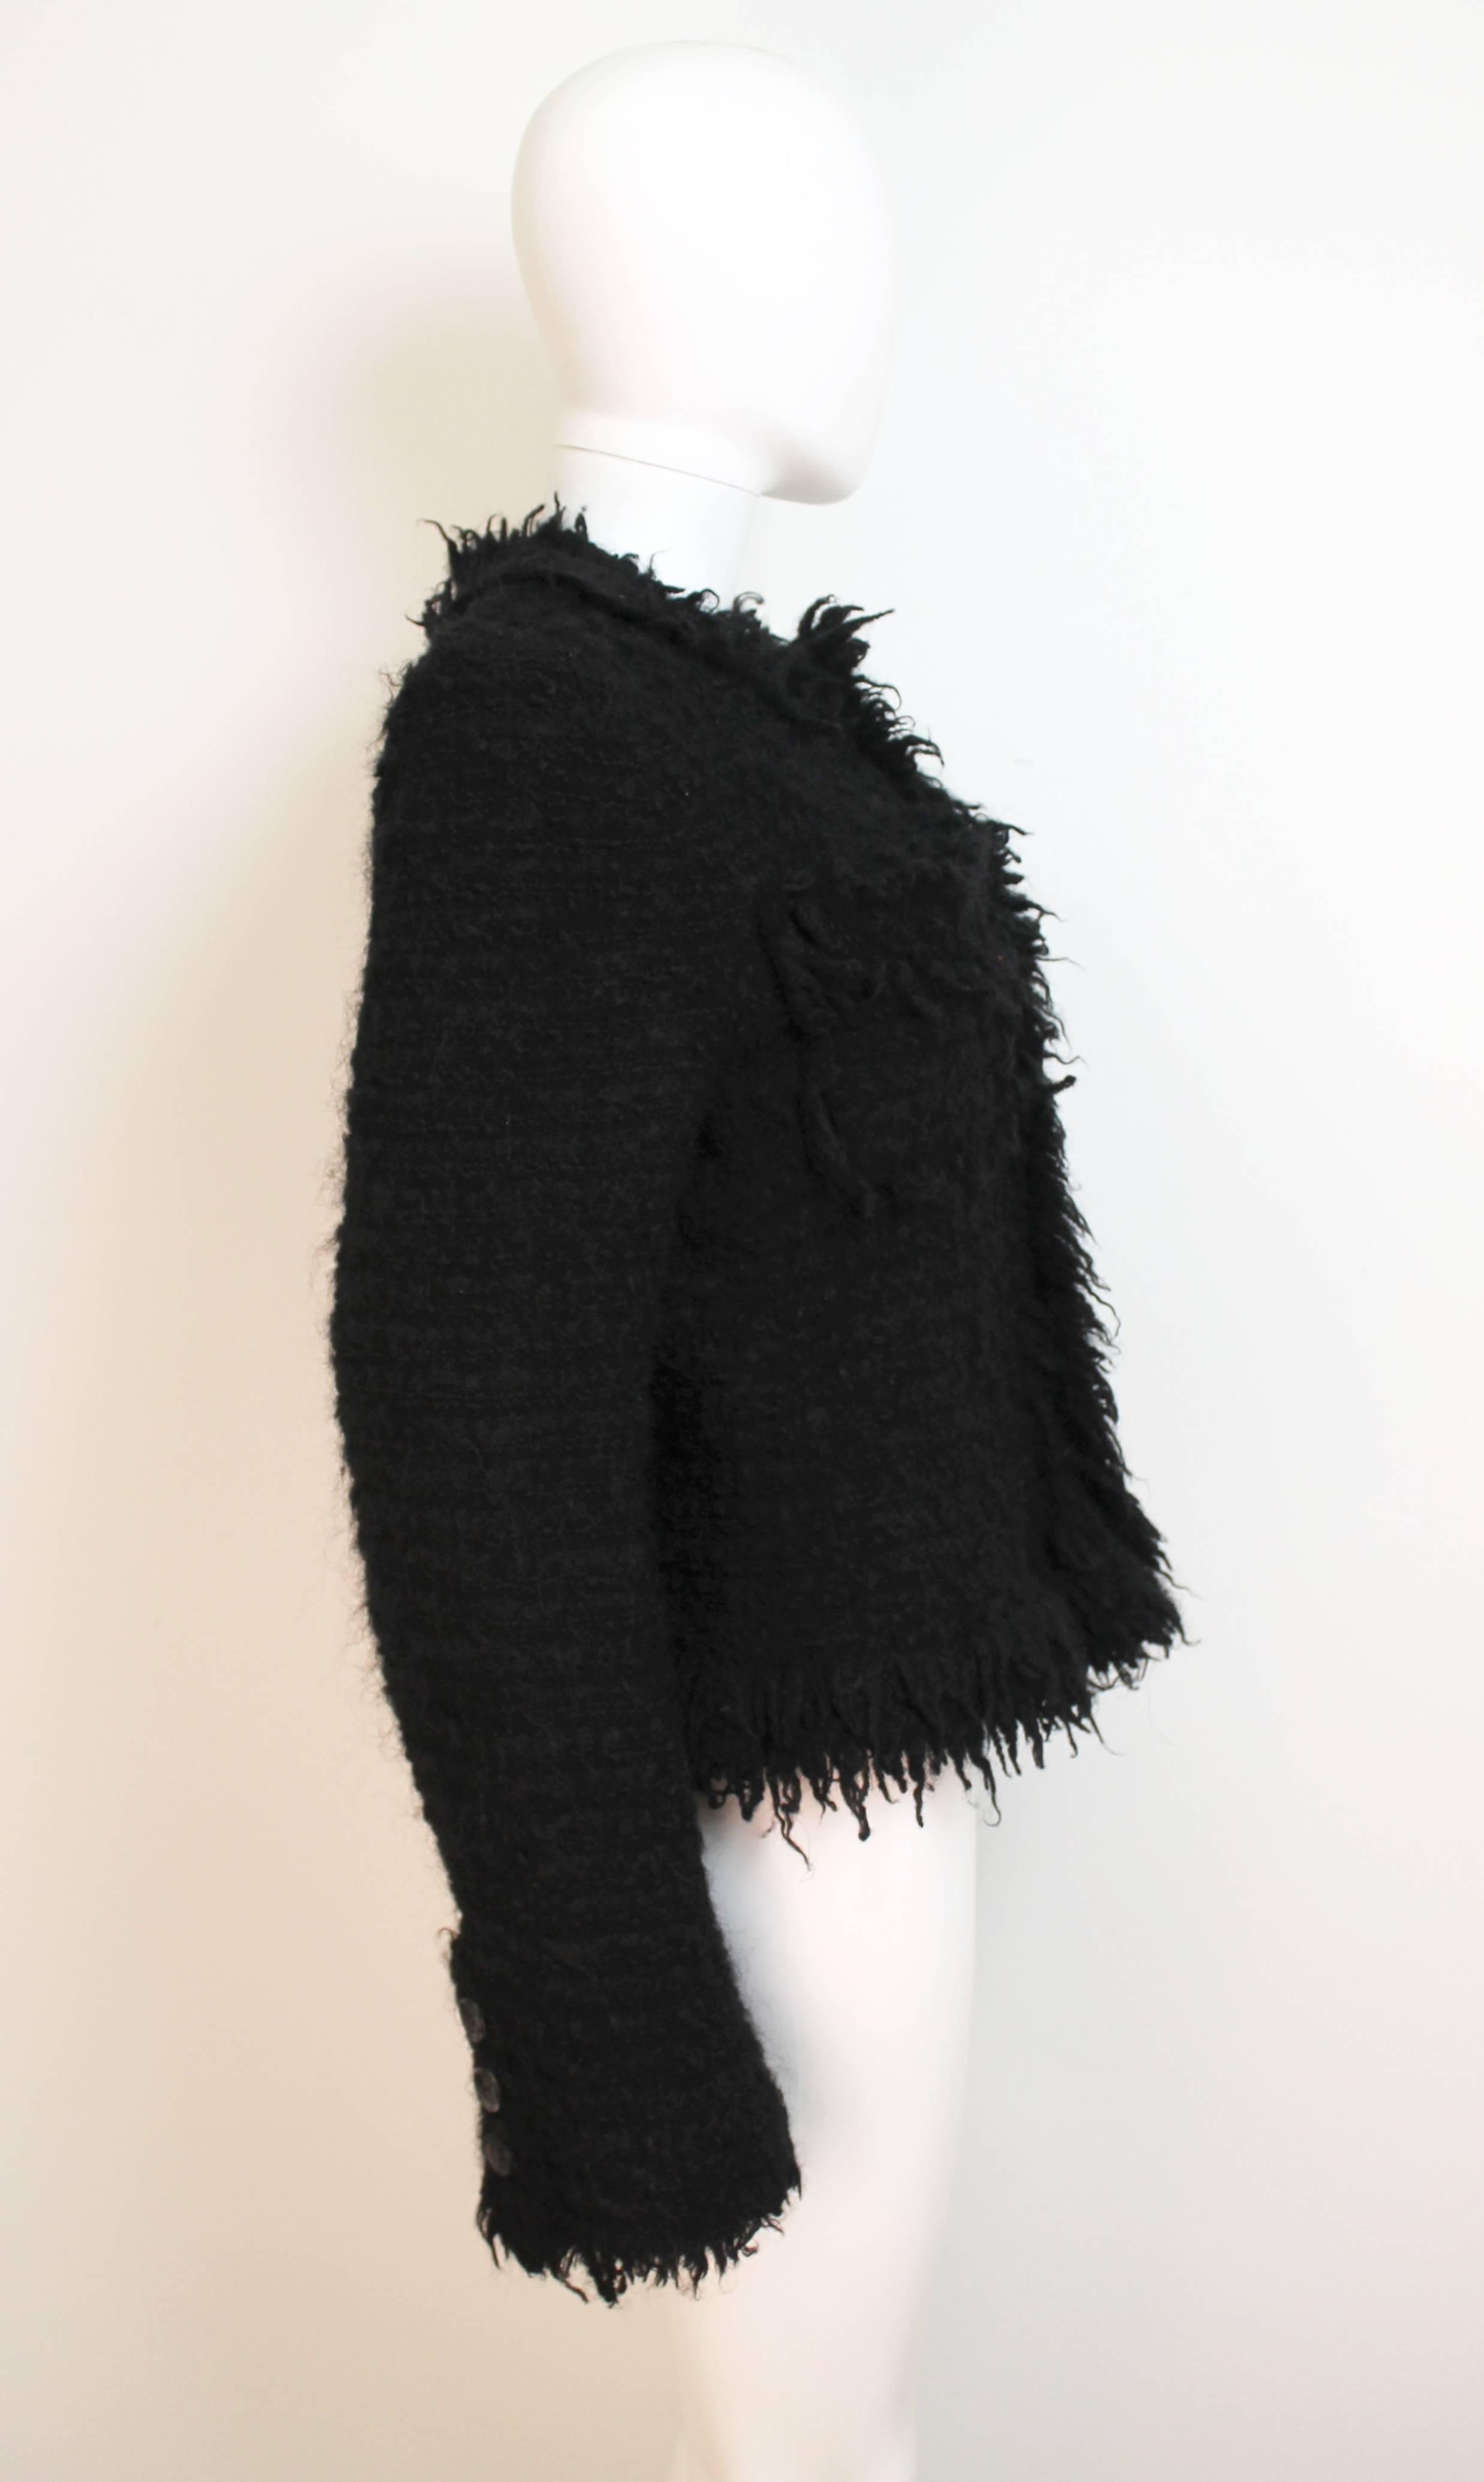 Beautiful black woven jacket with curled and loose yarn leaving the garment raw and unravelling. The piece is from the Fall Winter 2003 collection, which presents the audience with classic fashionable clothing as interpreted by Watanabe.